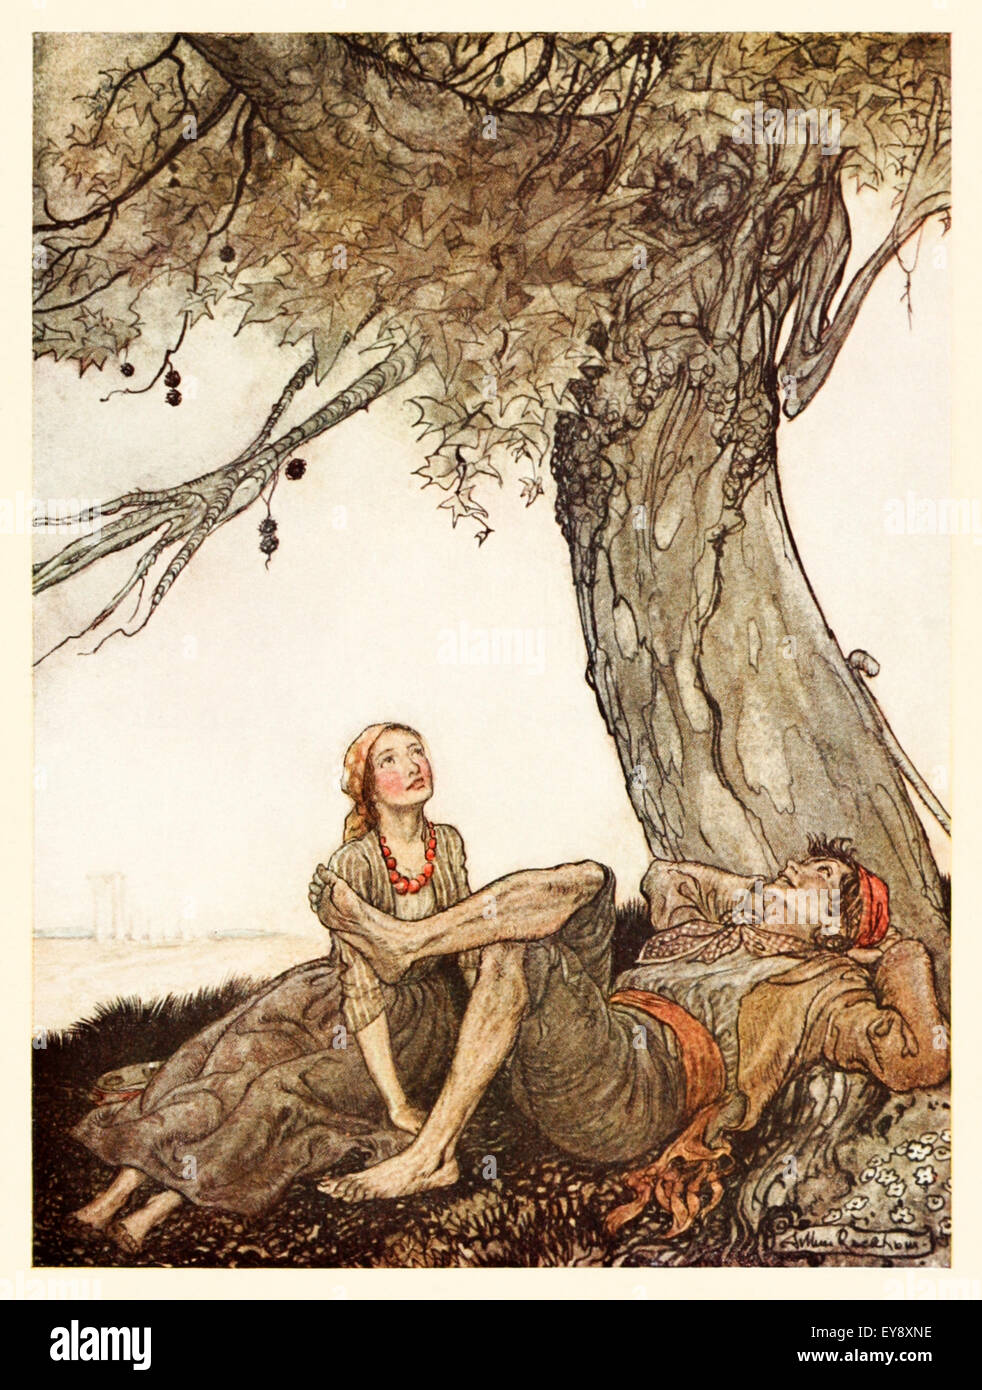 'The Travellers and the Plane Tree' fable by Aesop (circa 600BC). Two travellers rest in the shade of a Plane tree and remark on how useless it is as it has no fruit. Many a service is met with ingratitude. Illustration by Arthur Rackham (1867-1939). See description for more information. Stock Photo